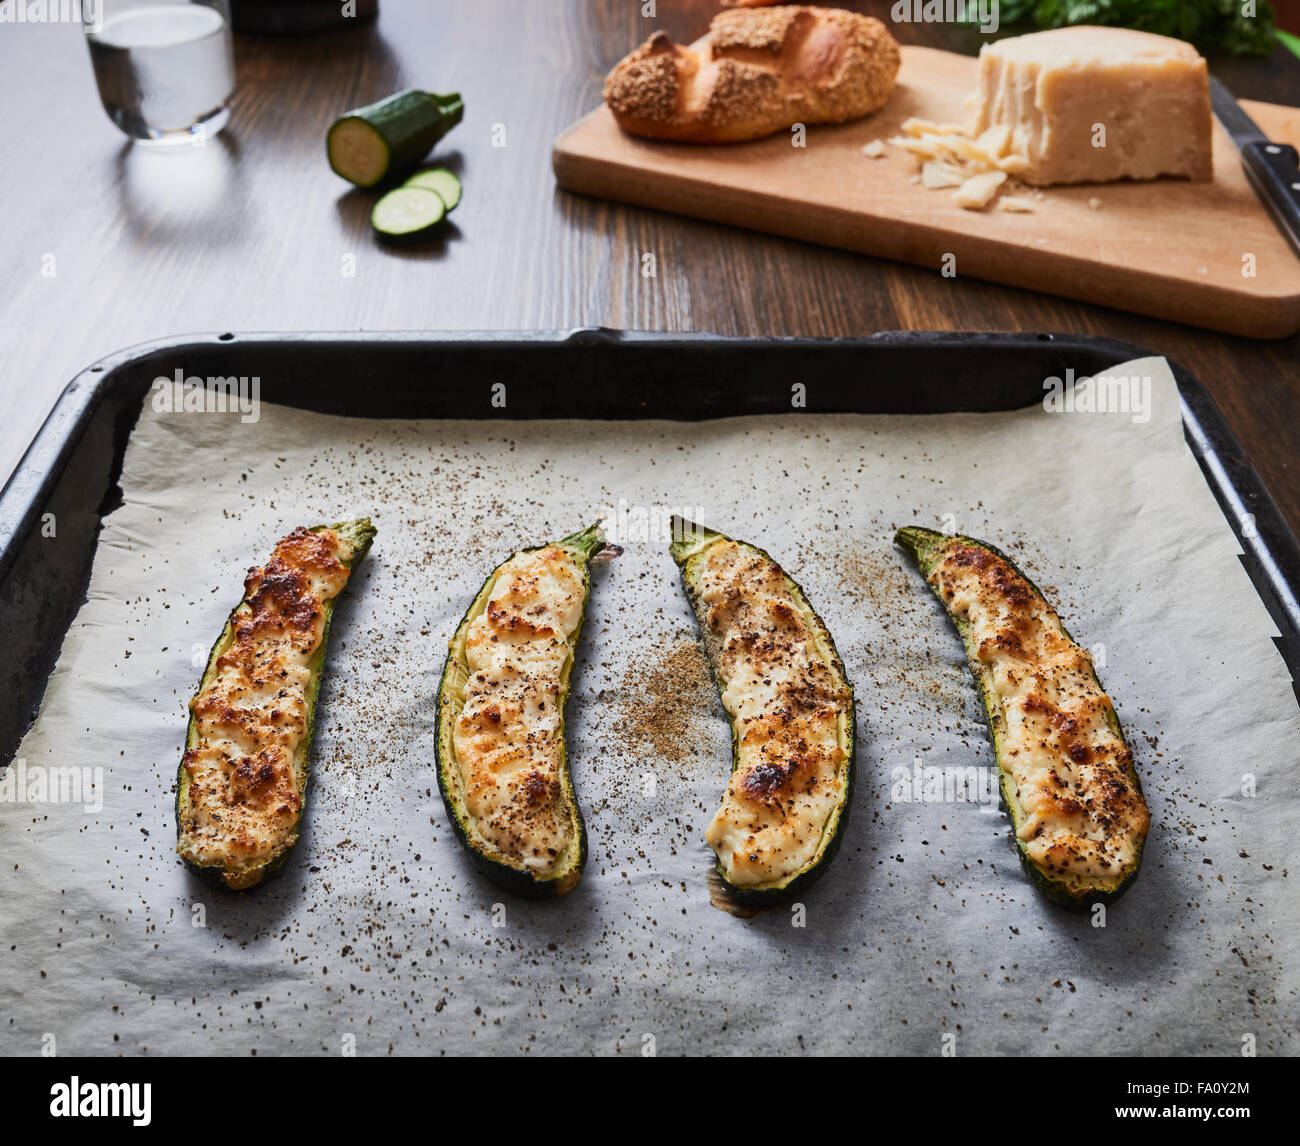 zucchini with ricotta cheese baked on baking sheet Stock Photo